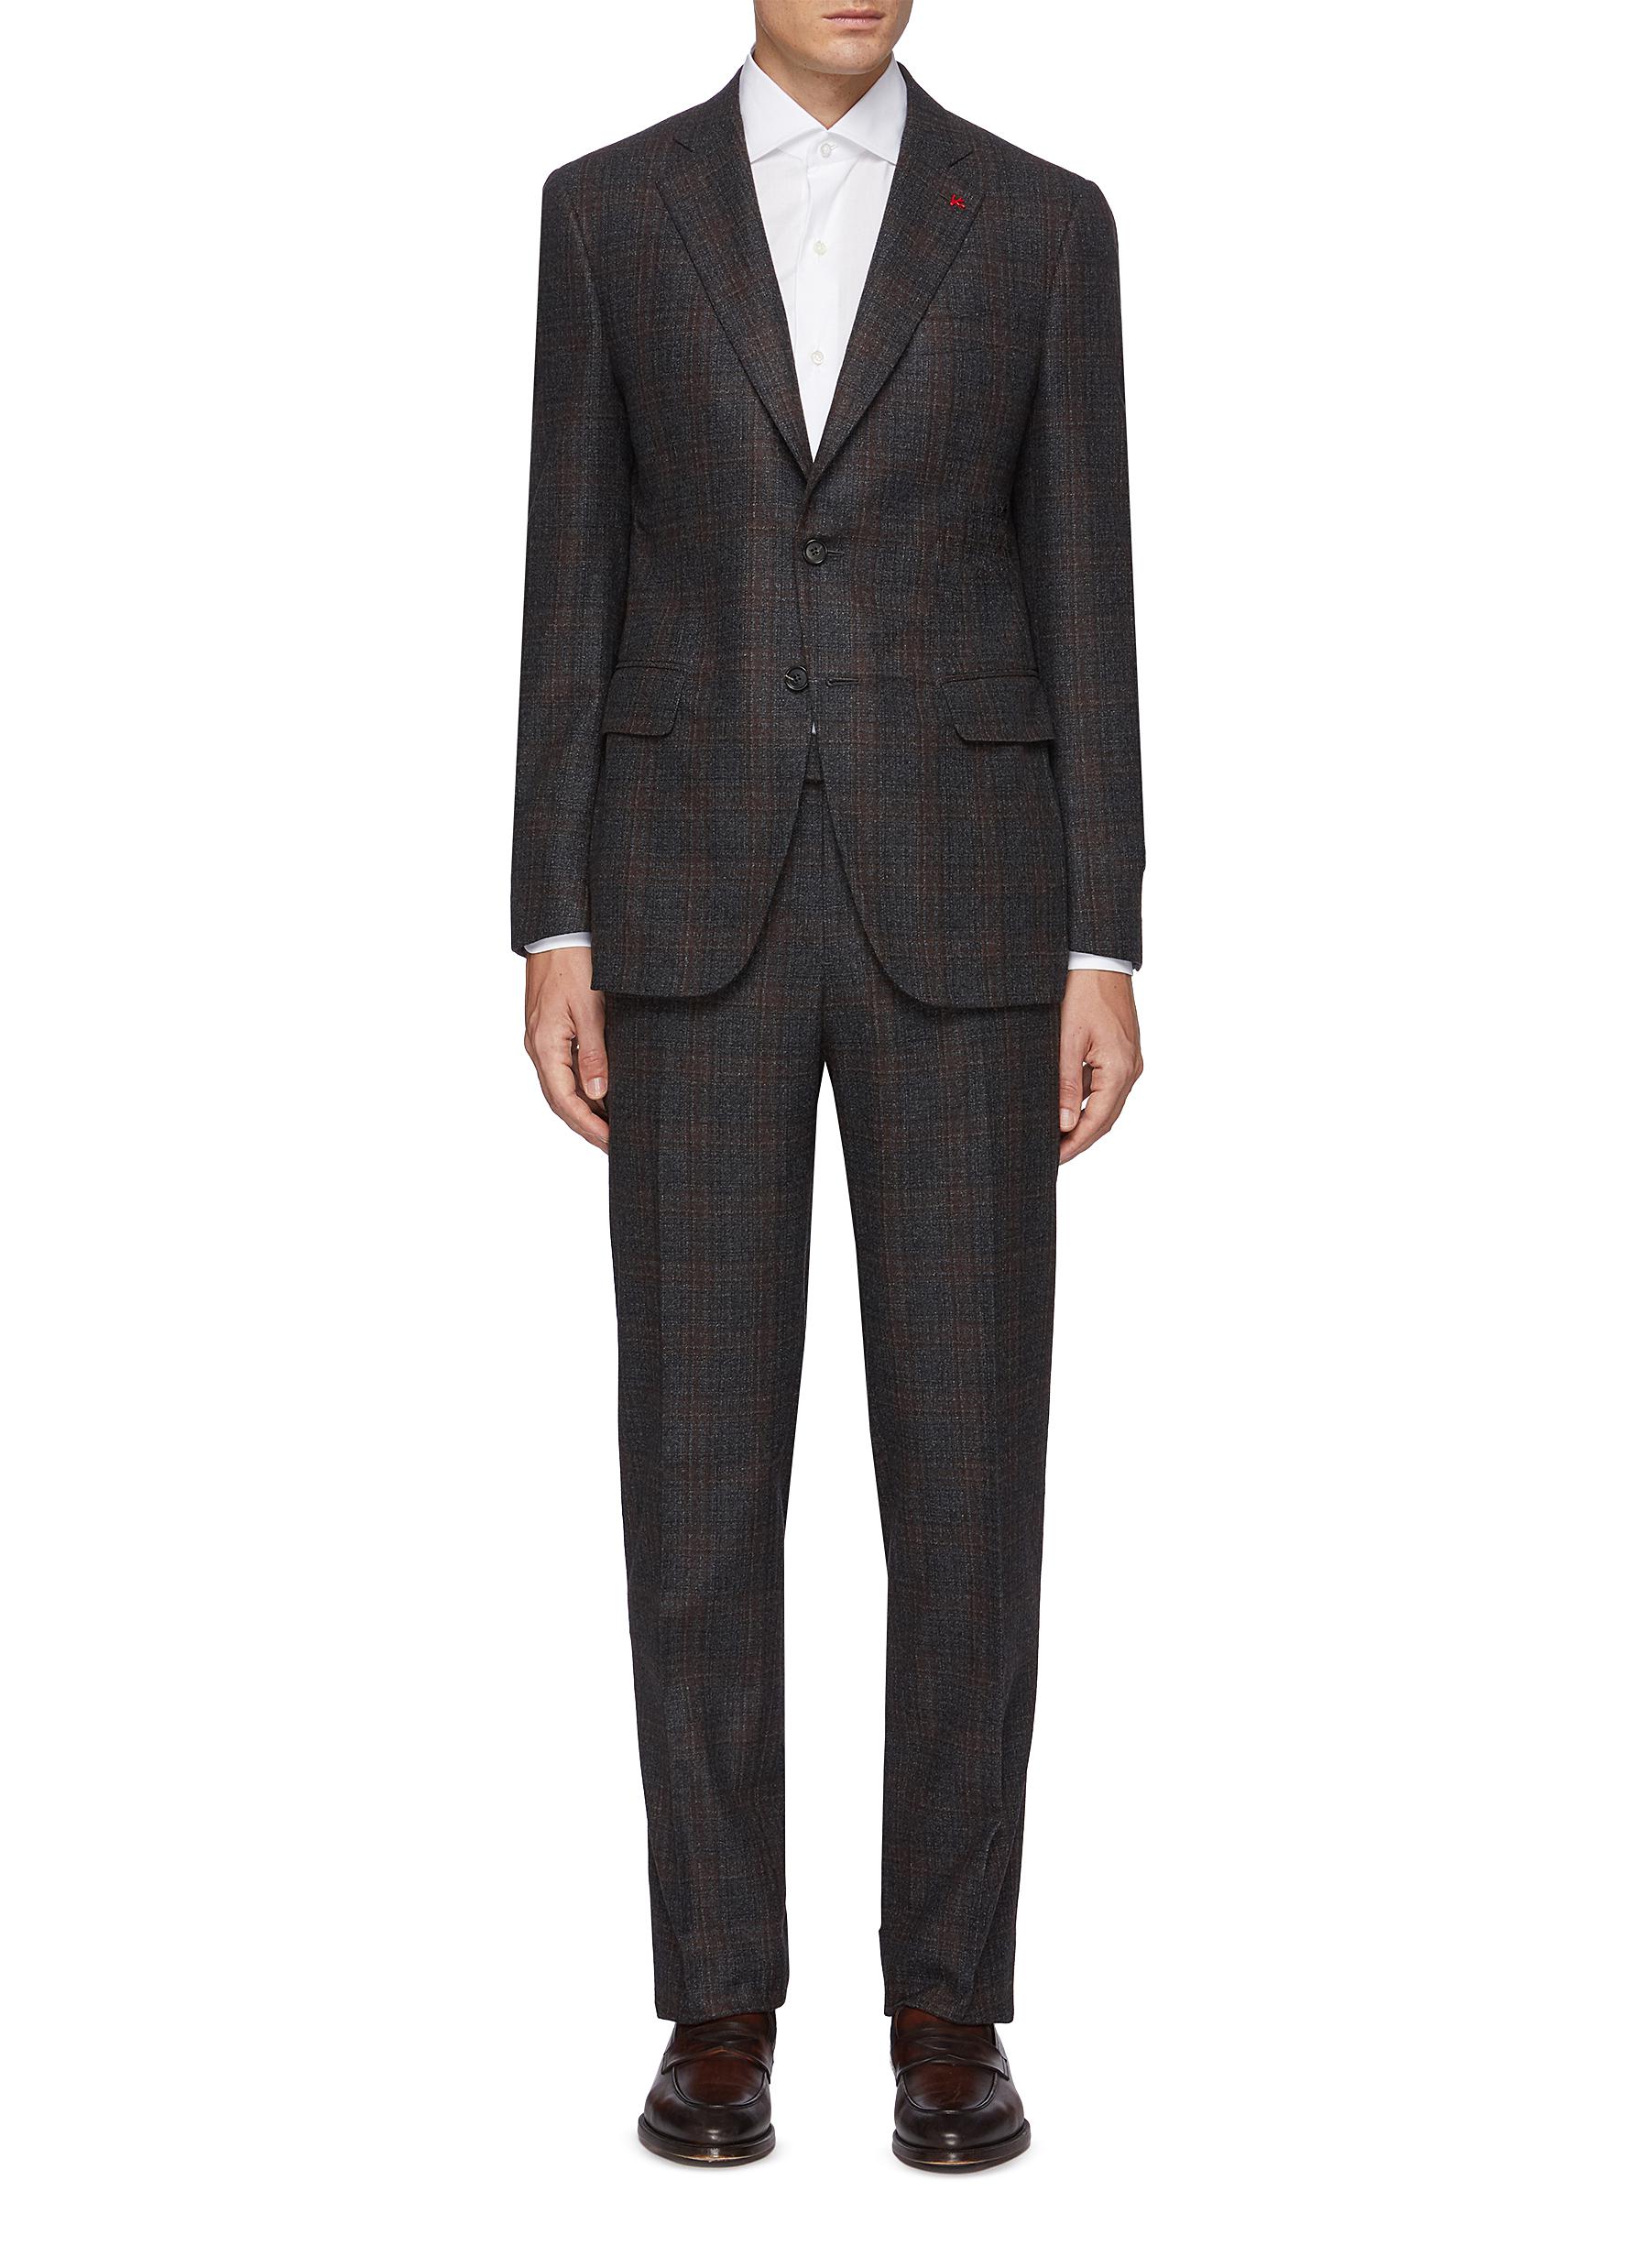 ISAIA 'GREGORY' CHECK NOTCH LAPEL WOOL CASHMERE BLEND SUIT